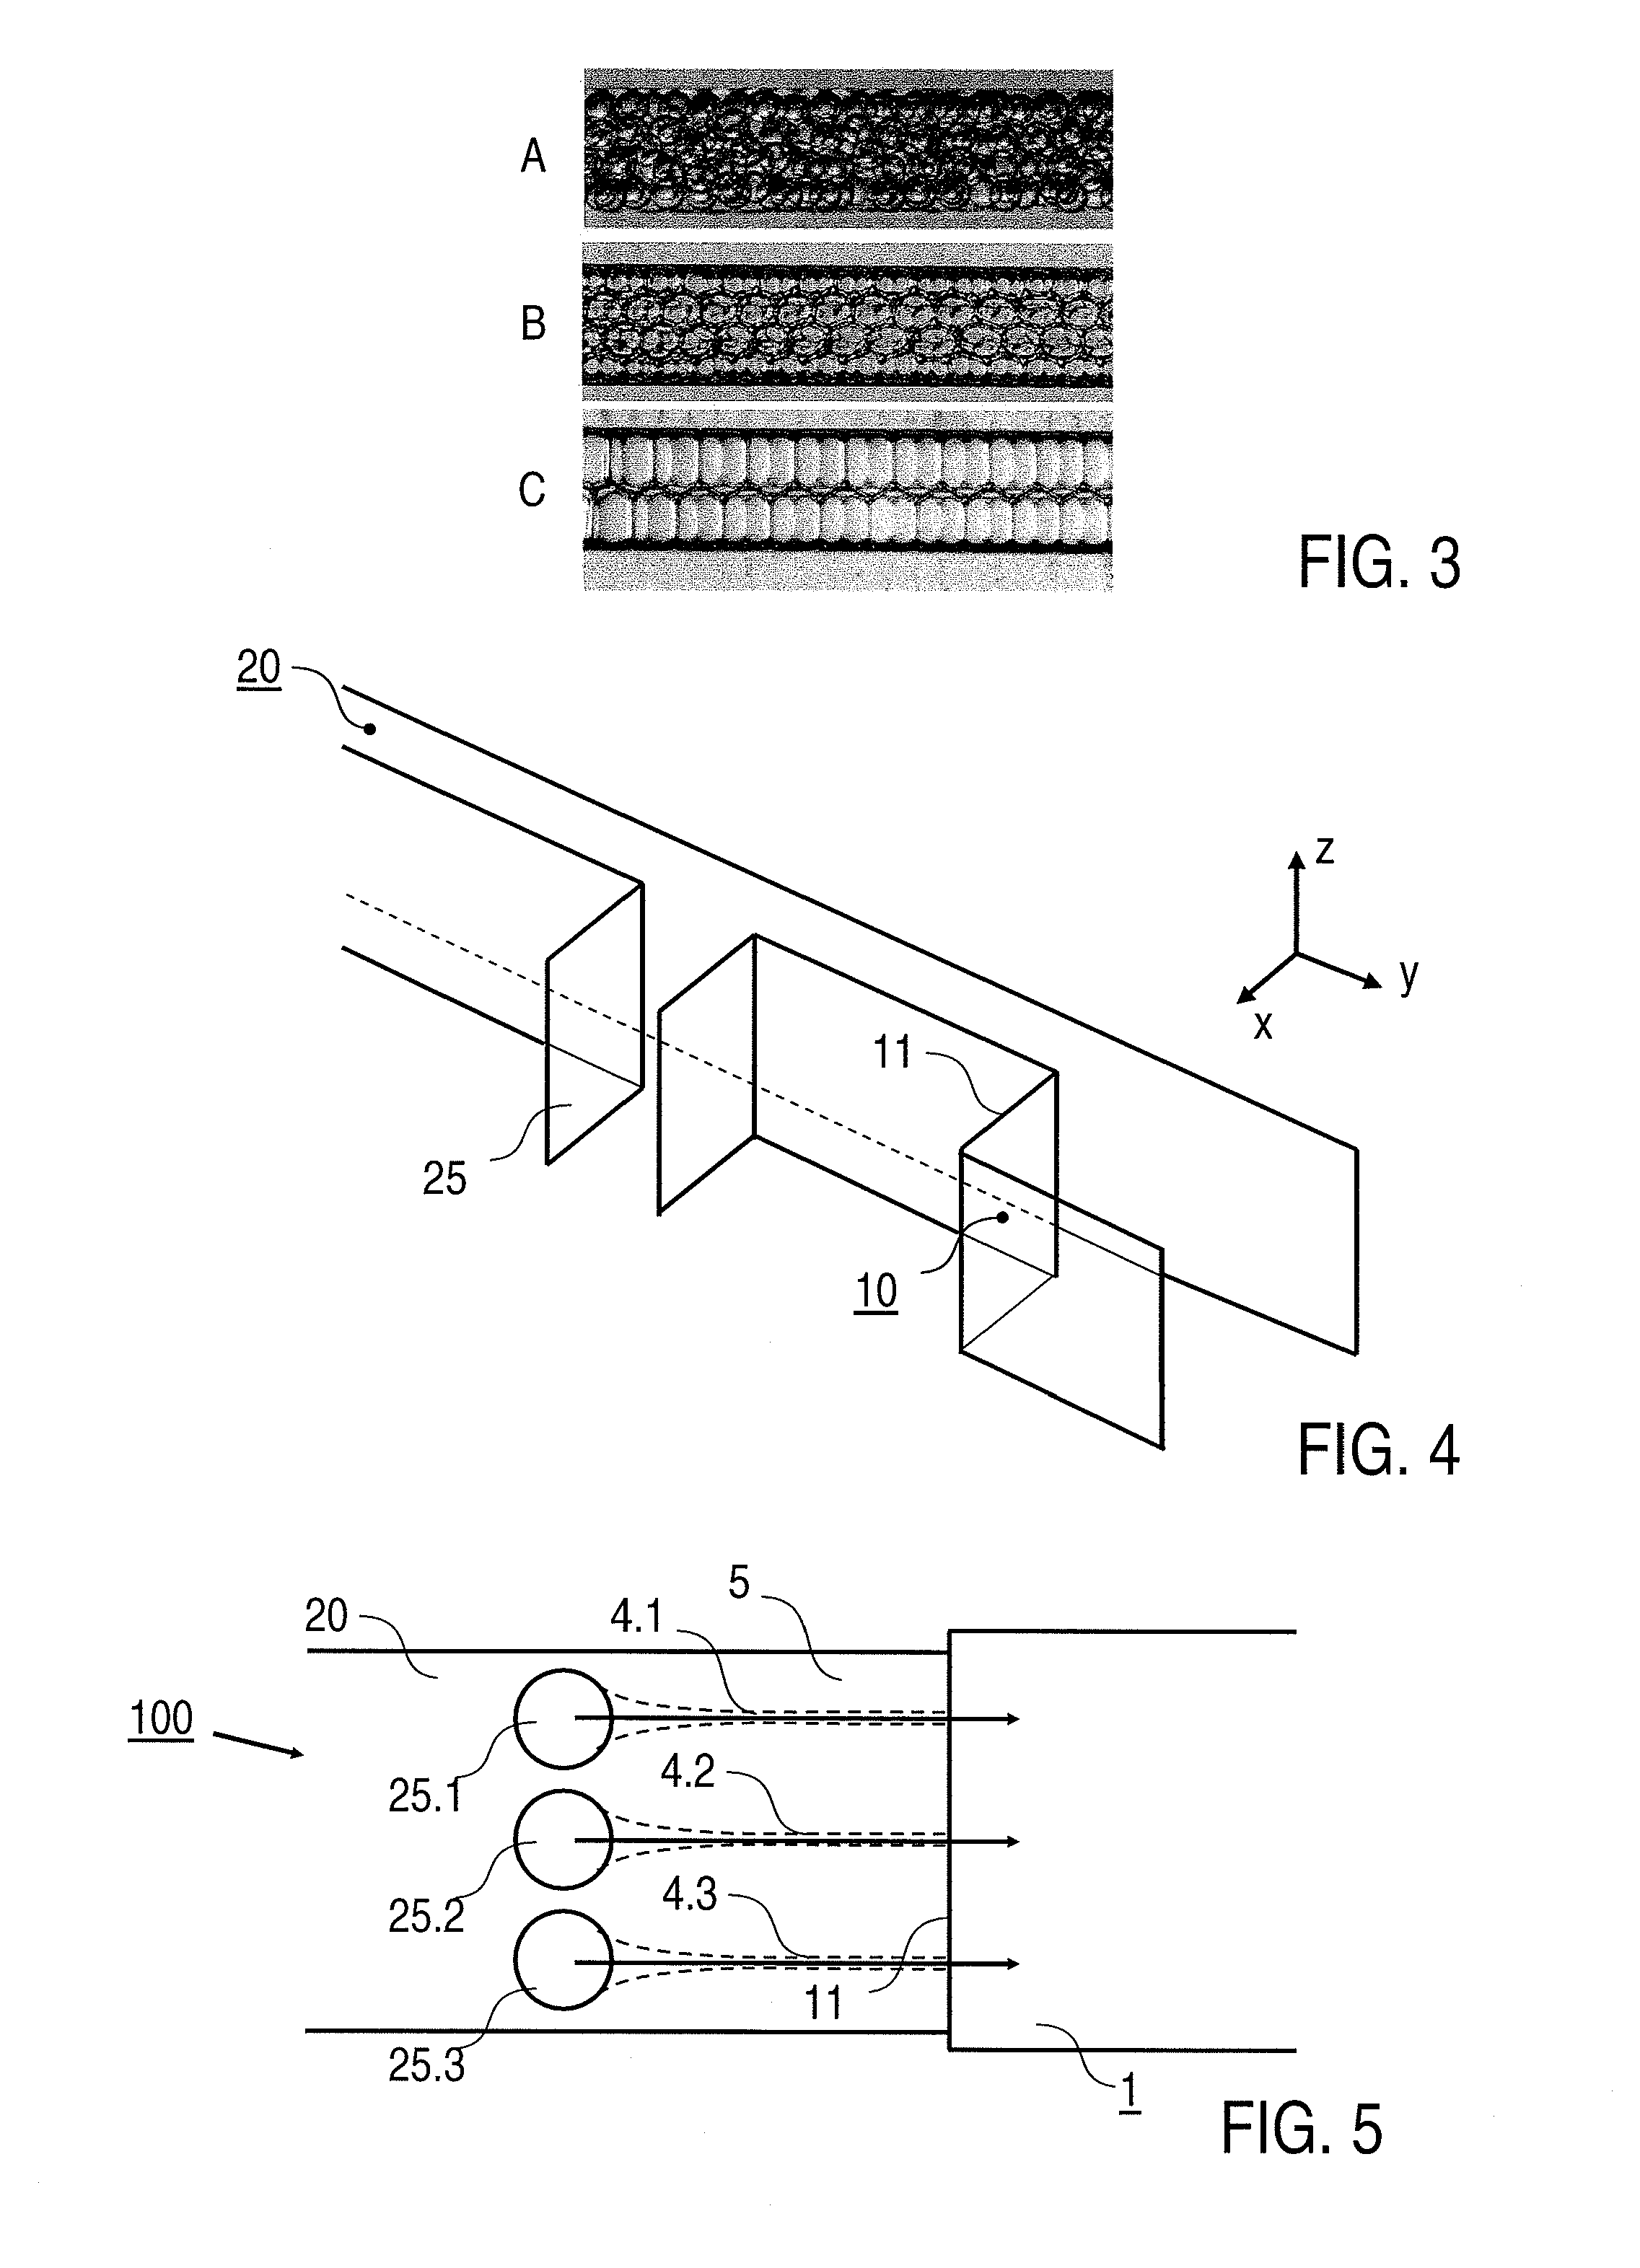 Formation of an emulsion in a fluid microsystem